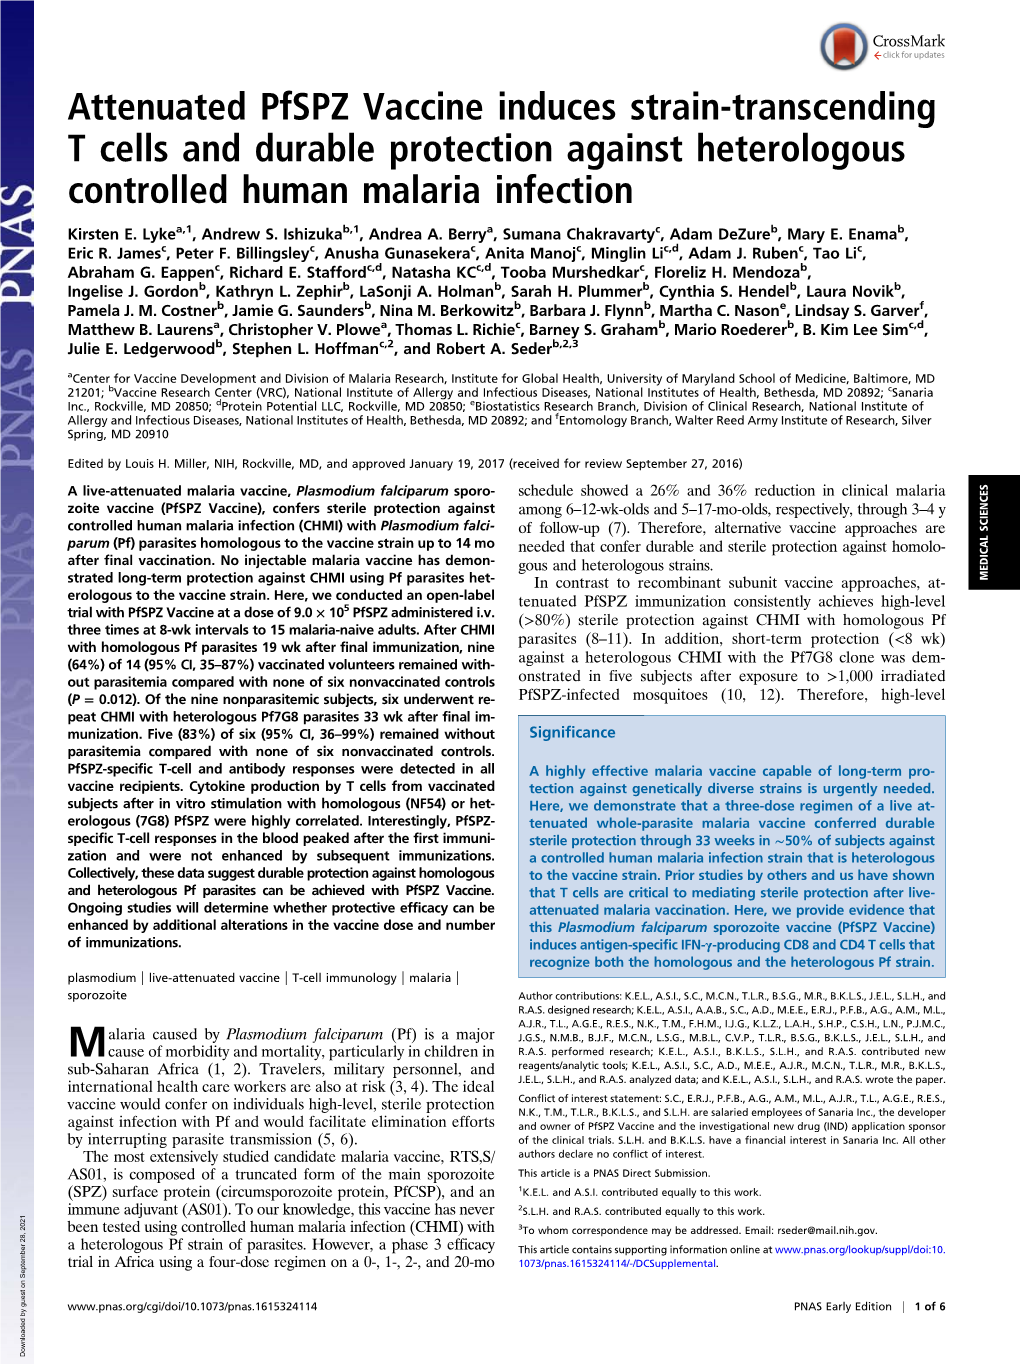 Attenuated Pfspz Vaccine Induces Strain-Transcending T Cells and Durable Protection Against Heterologous Controlled Human Malaria Infection